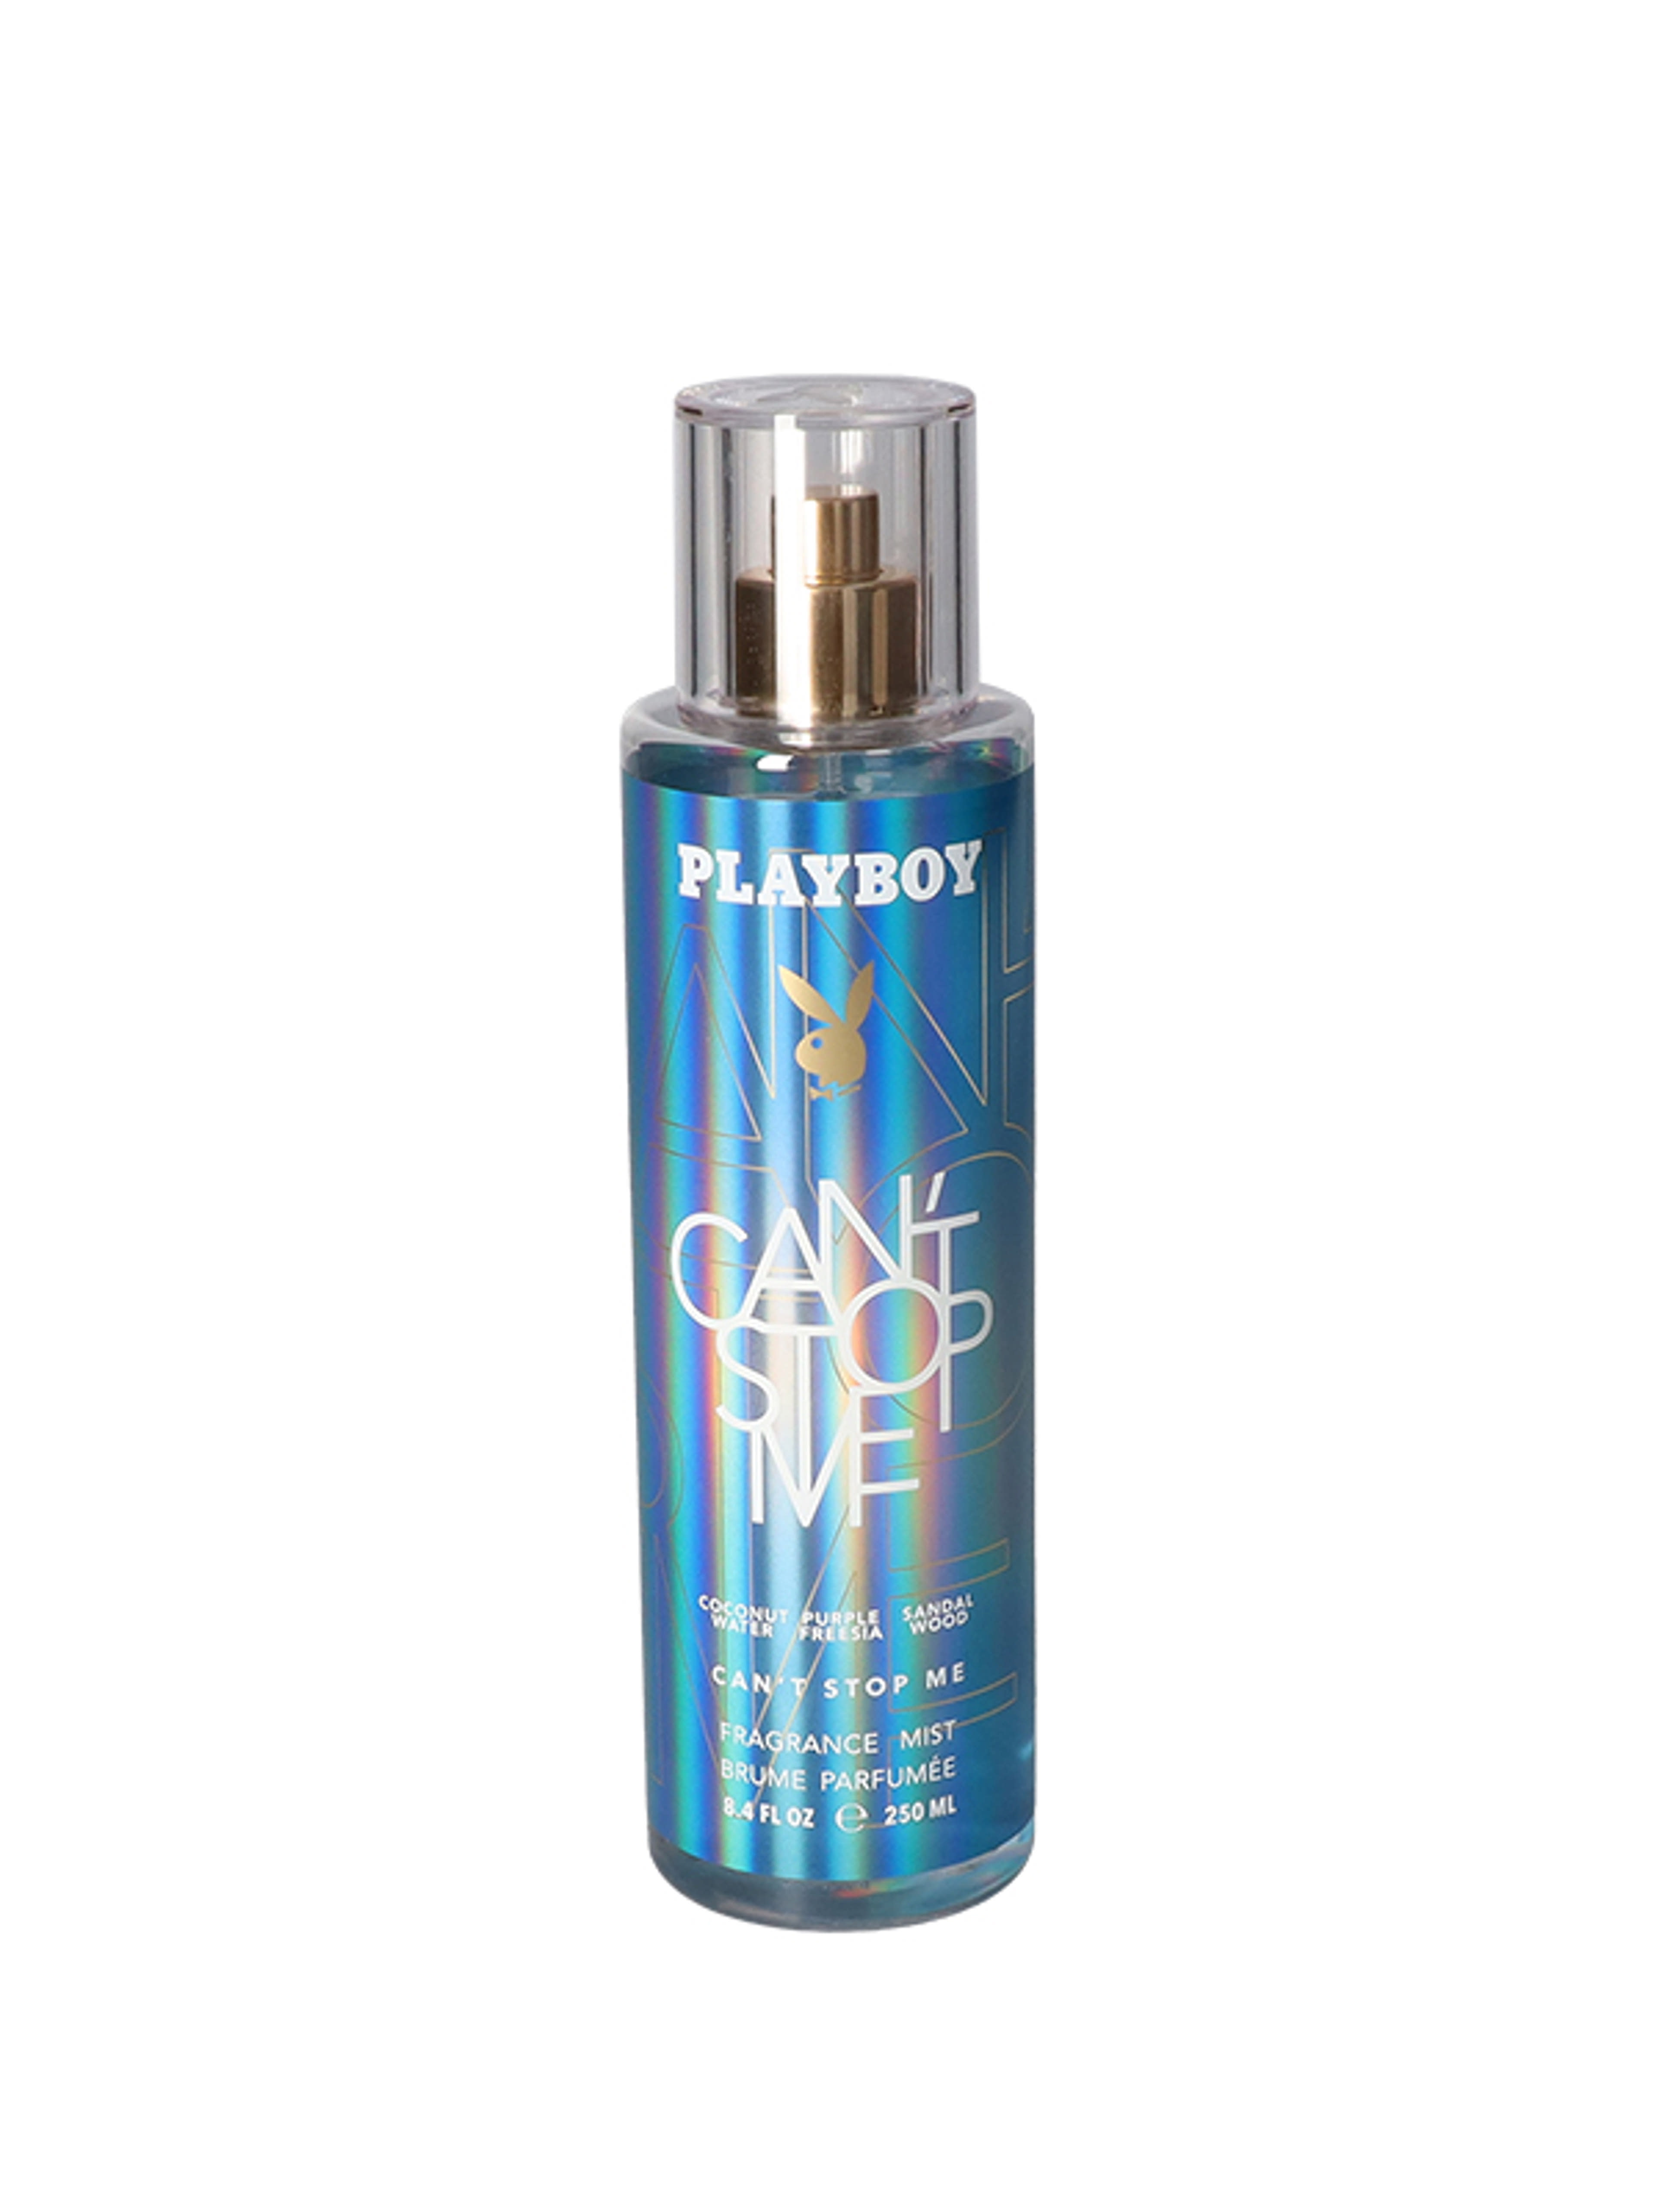 Playboy cant stop me body mist - 250 ml-1